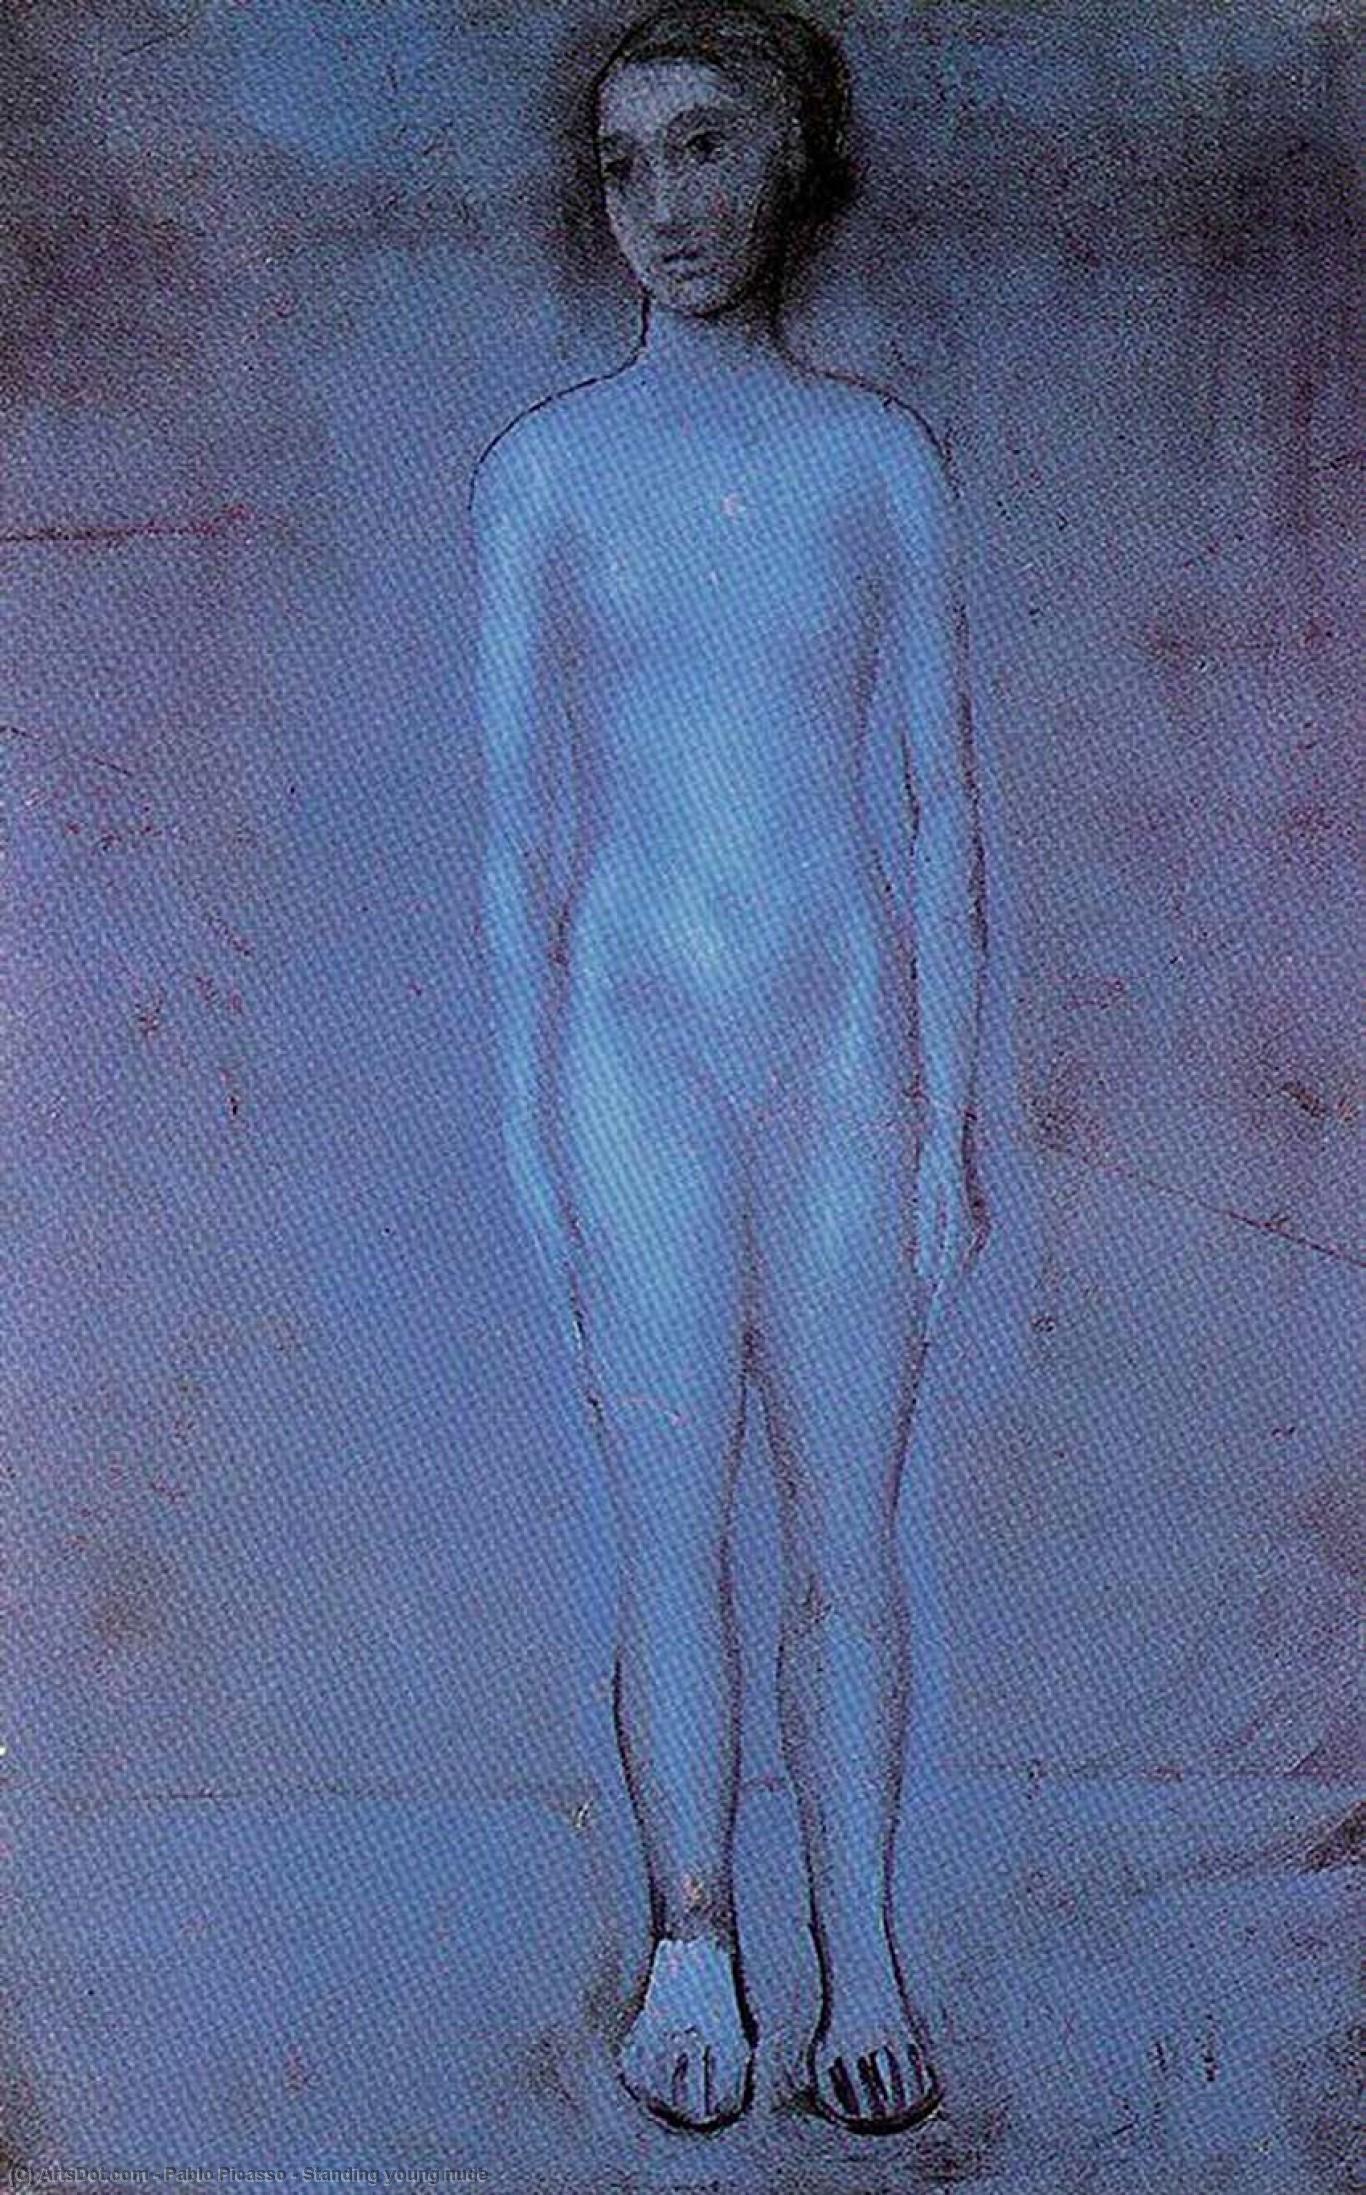 WikiOO.org - 백과 사전 - 회화, 삽화 Pablo Picasso - Standing young nude